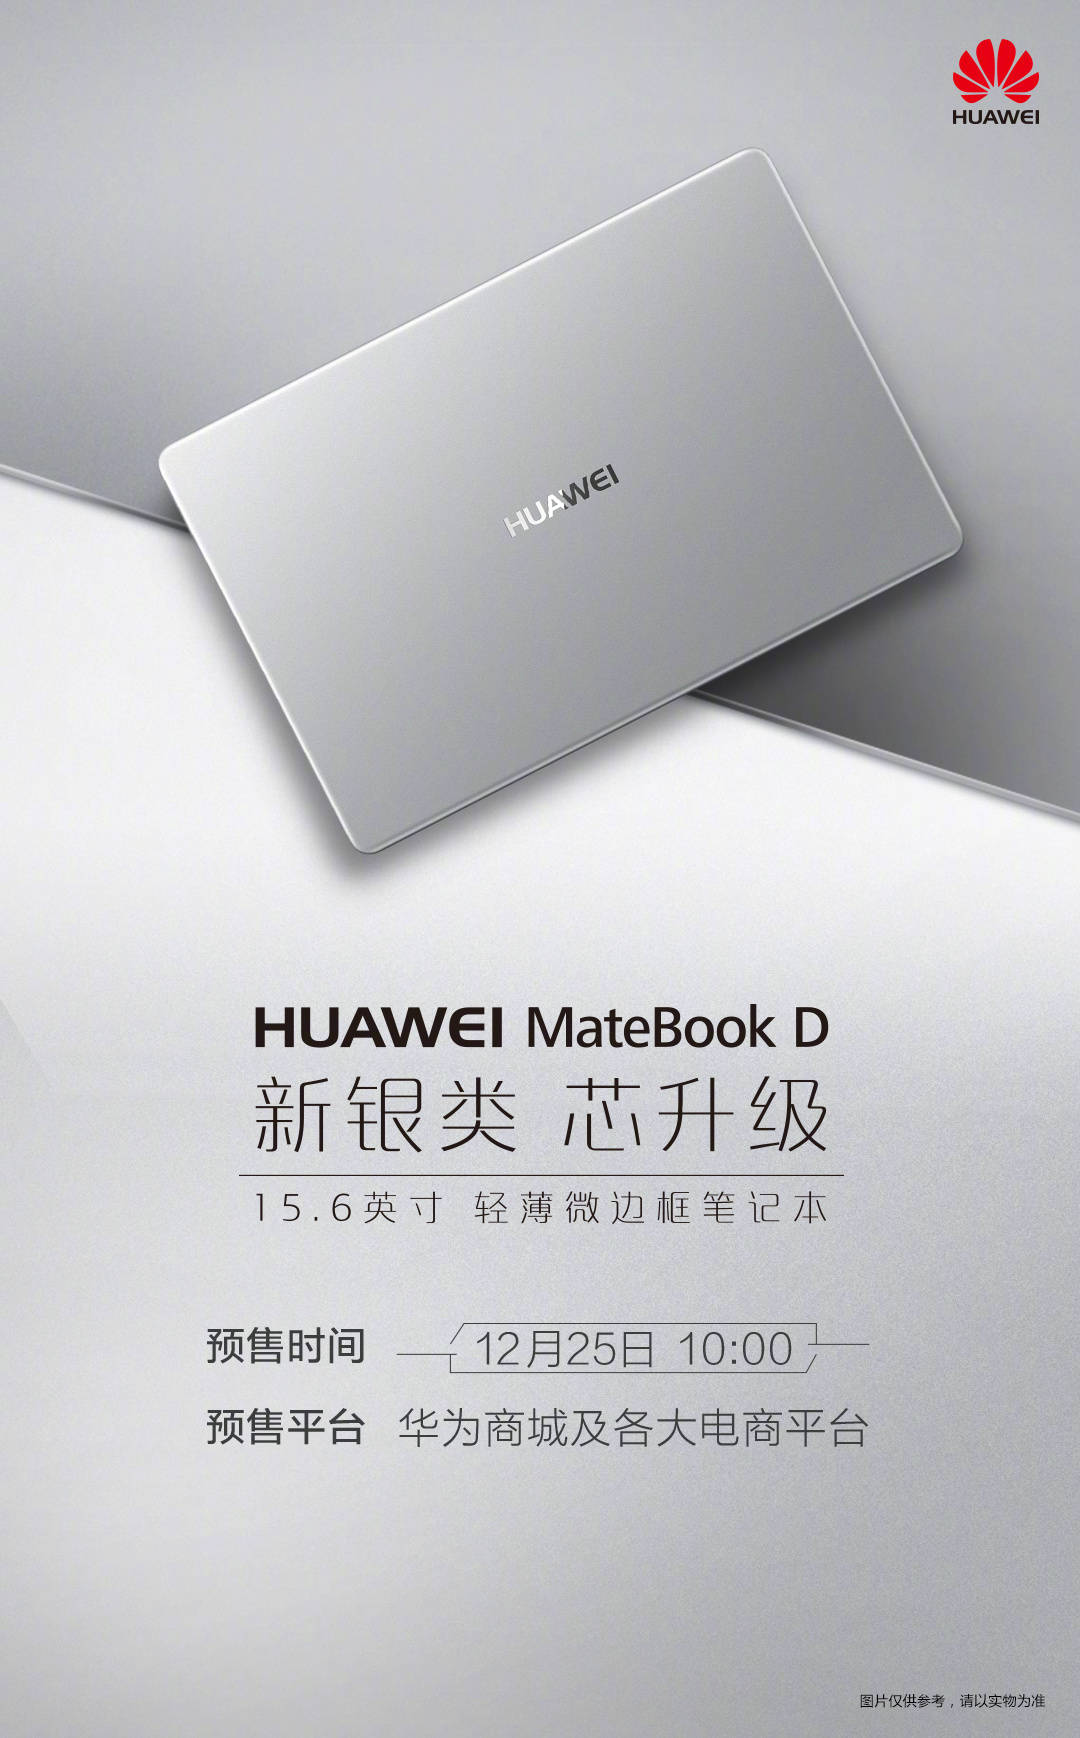 Huawei Announces Refreshed MateBook D (2018) With Upgraded CPU